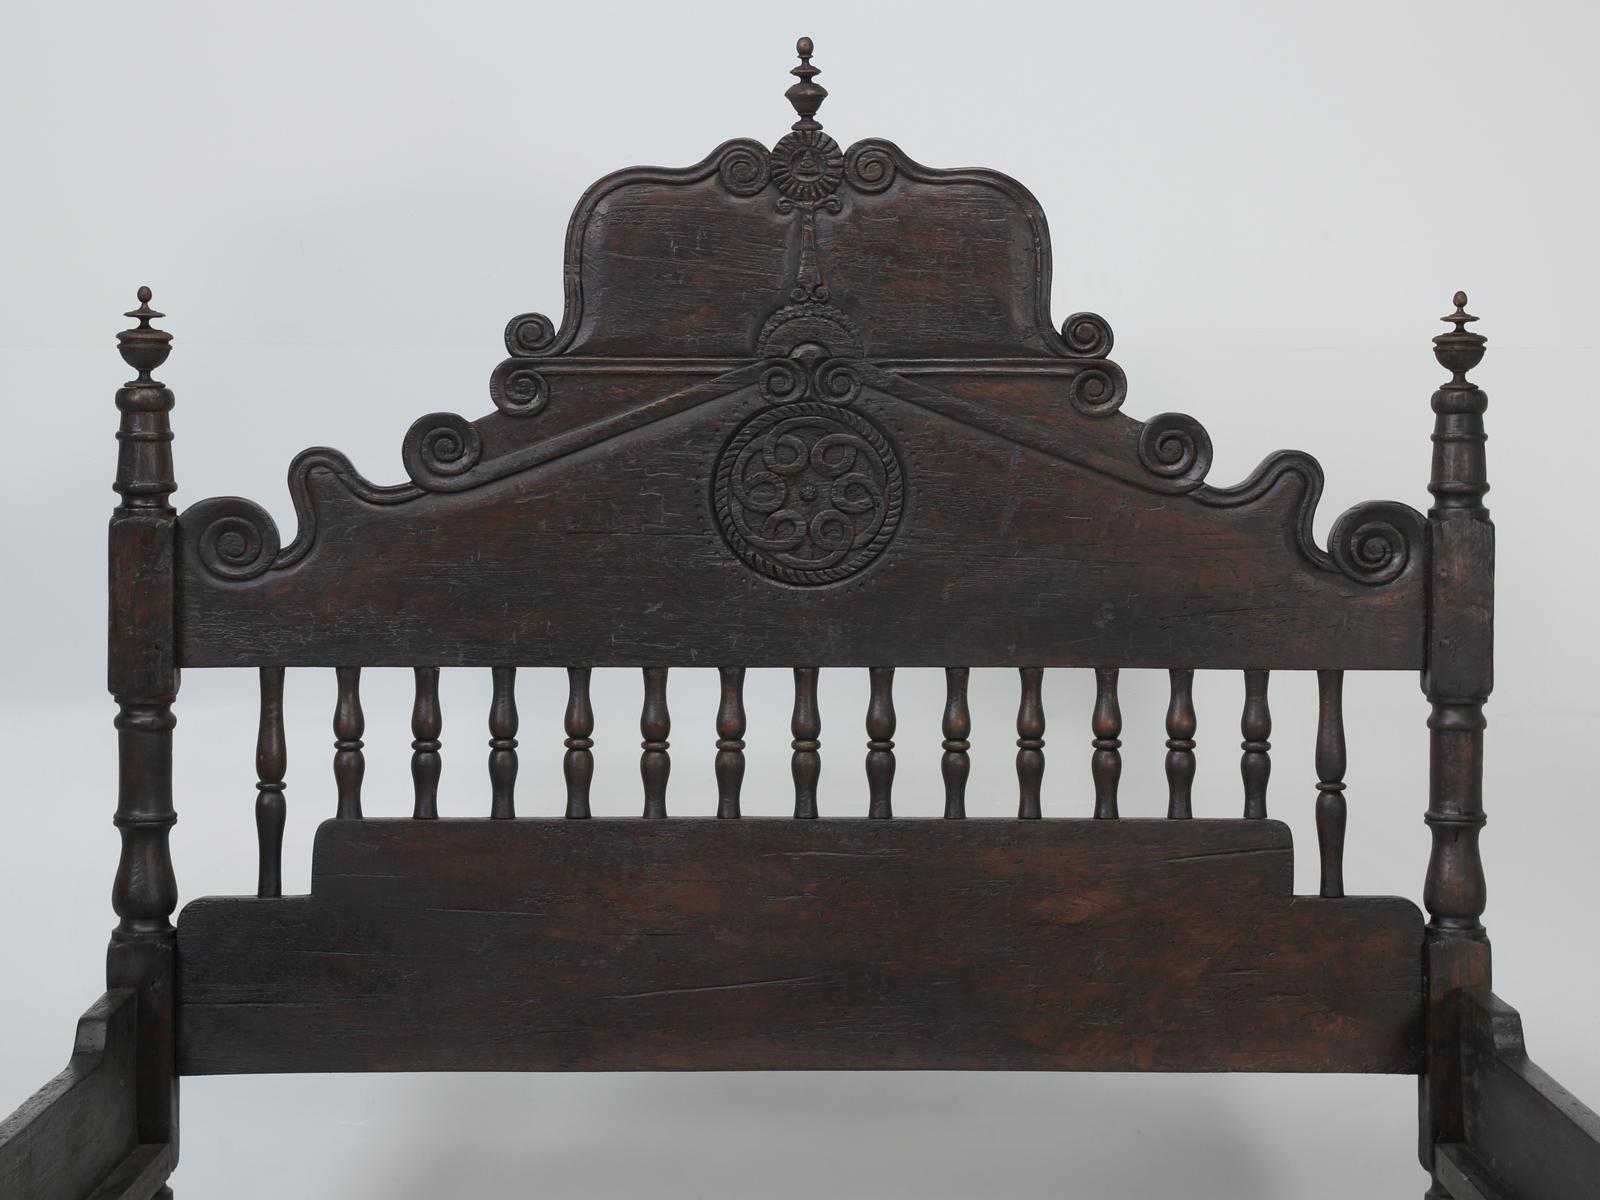 Proper reproduction of an antique Spanish Colonial Queen bed, made from solid mahogany, in an American Queen size. The Spanish Colonial style Queen style bed was hand carved in Peru by local artisans, while all the distressing and finishing details